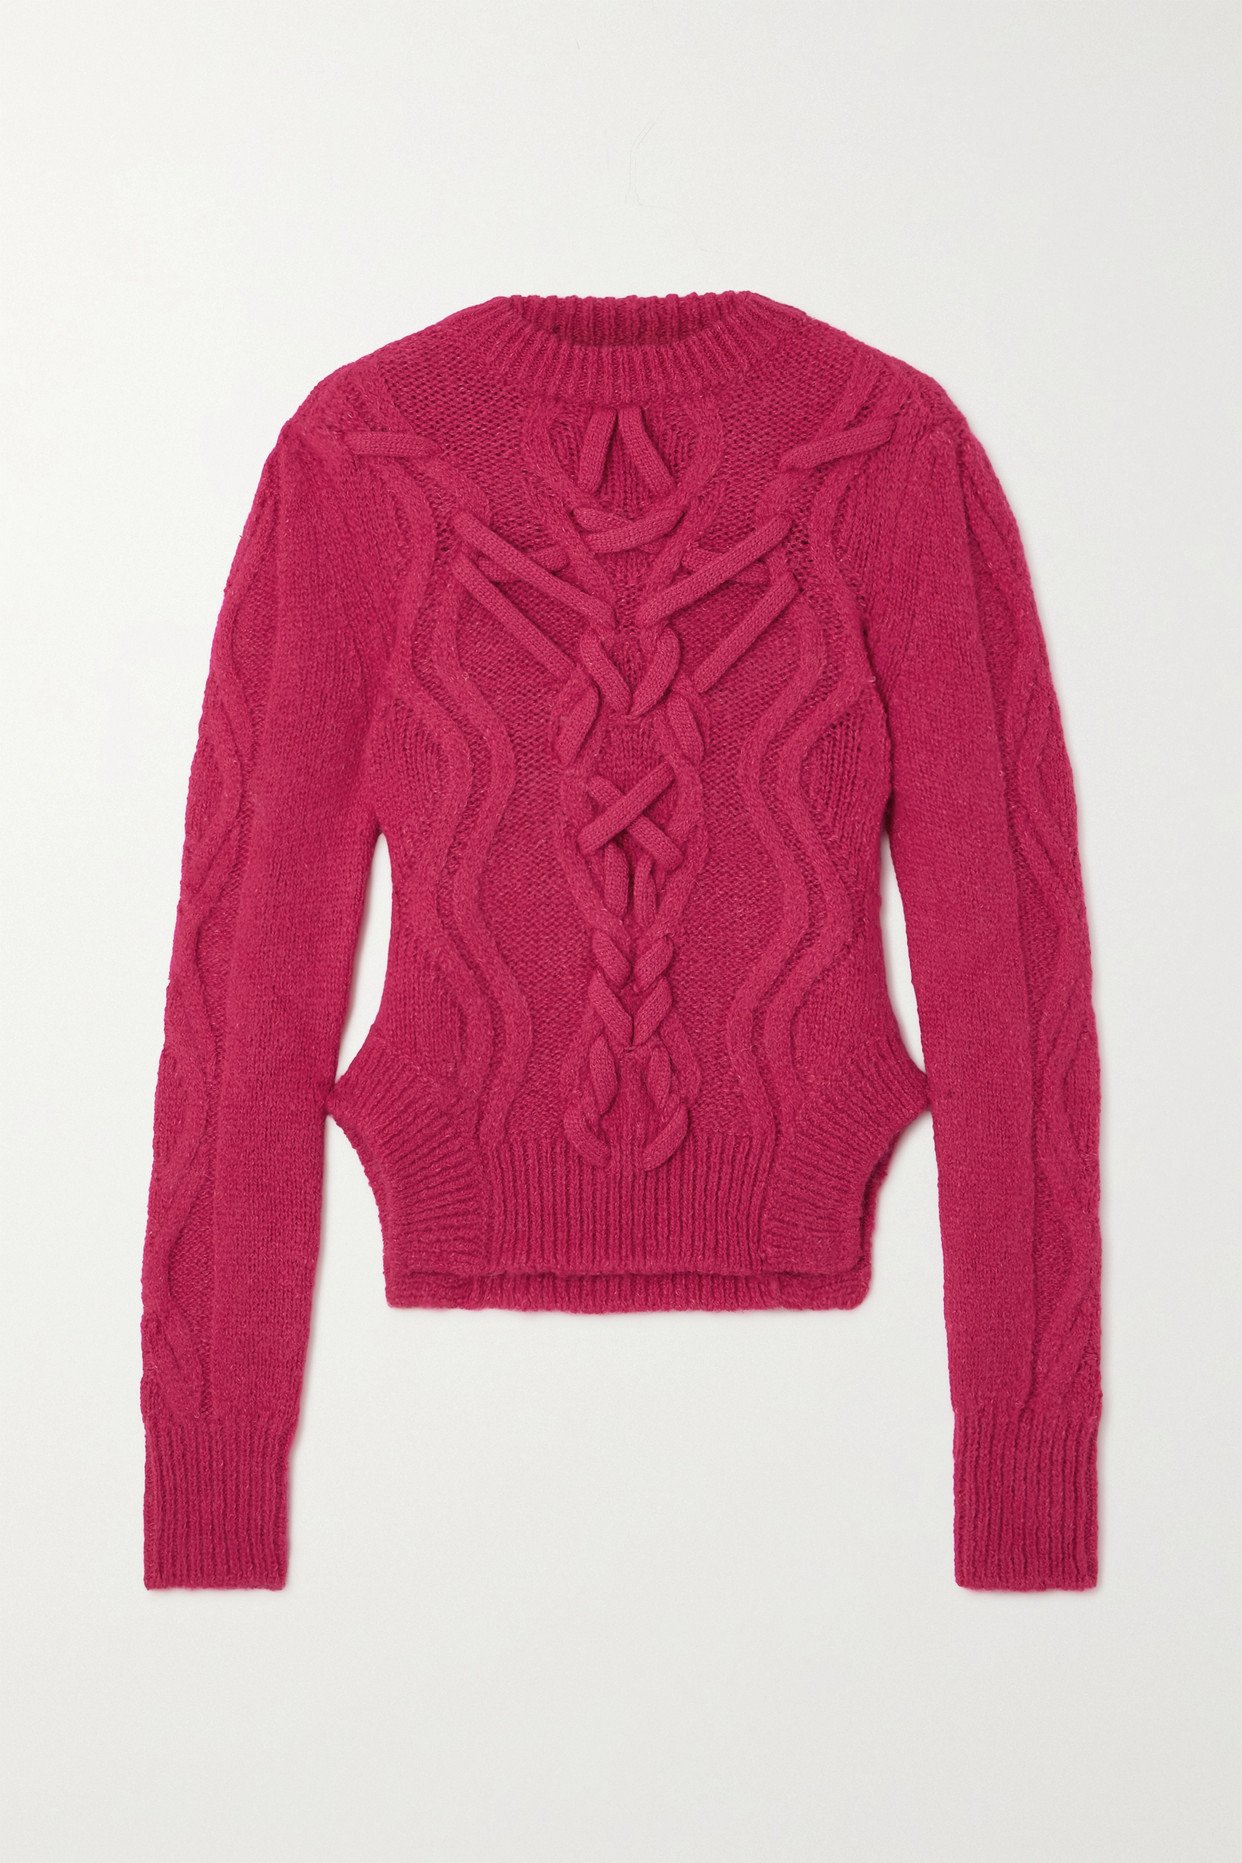 Margie Cropped Cable Knit Sweater (Candy Pink)